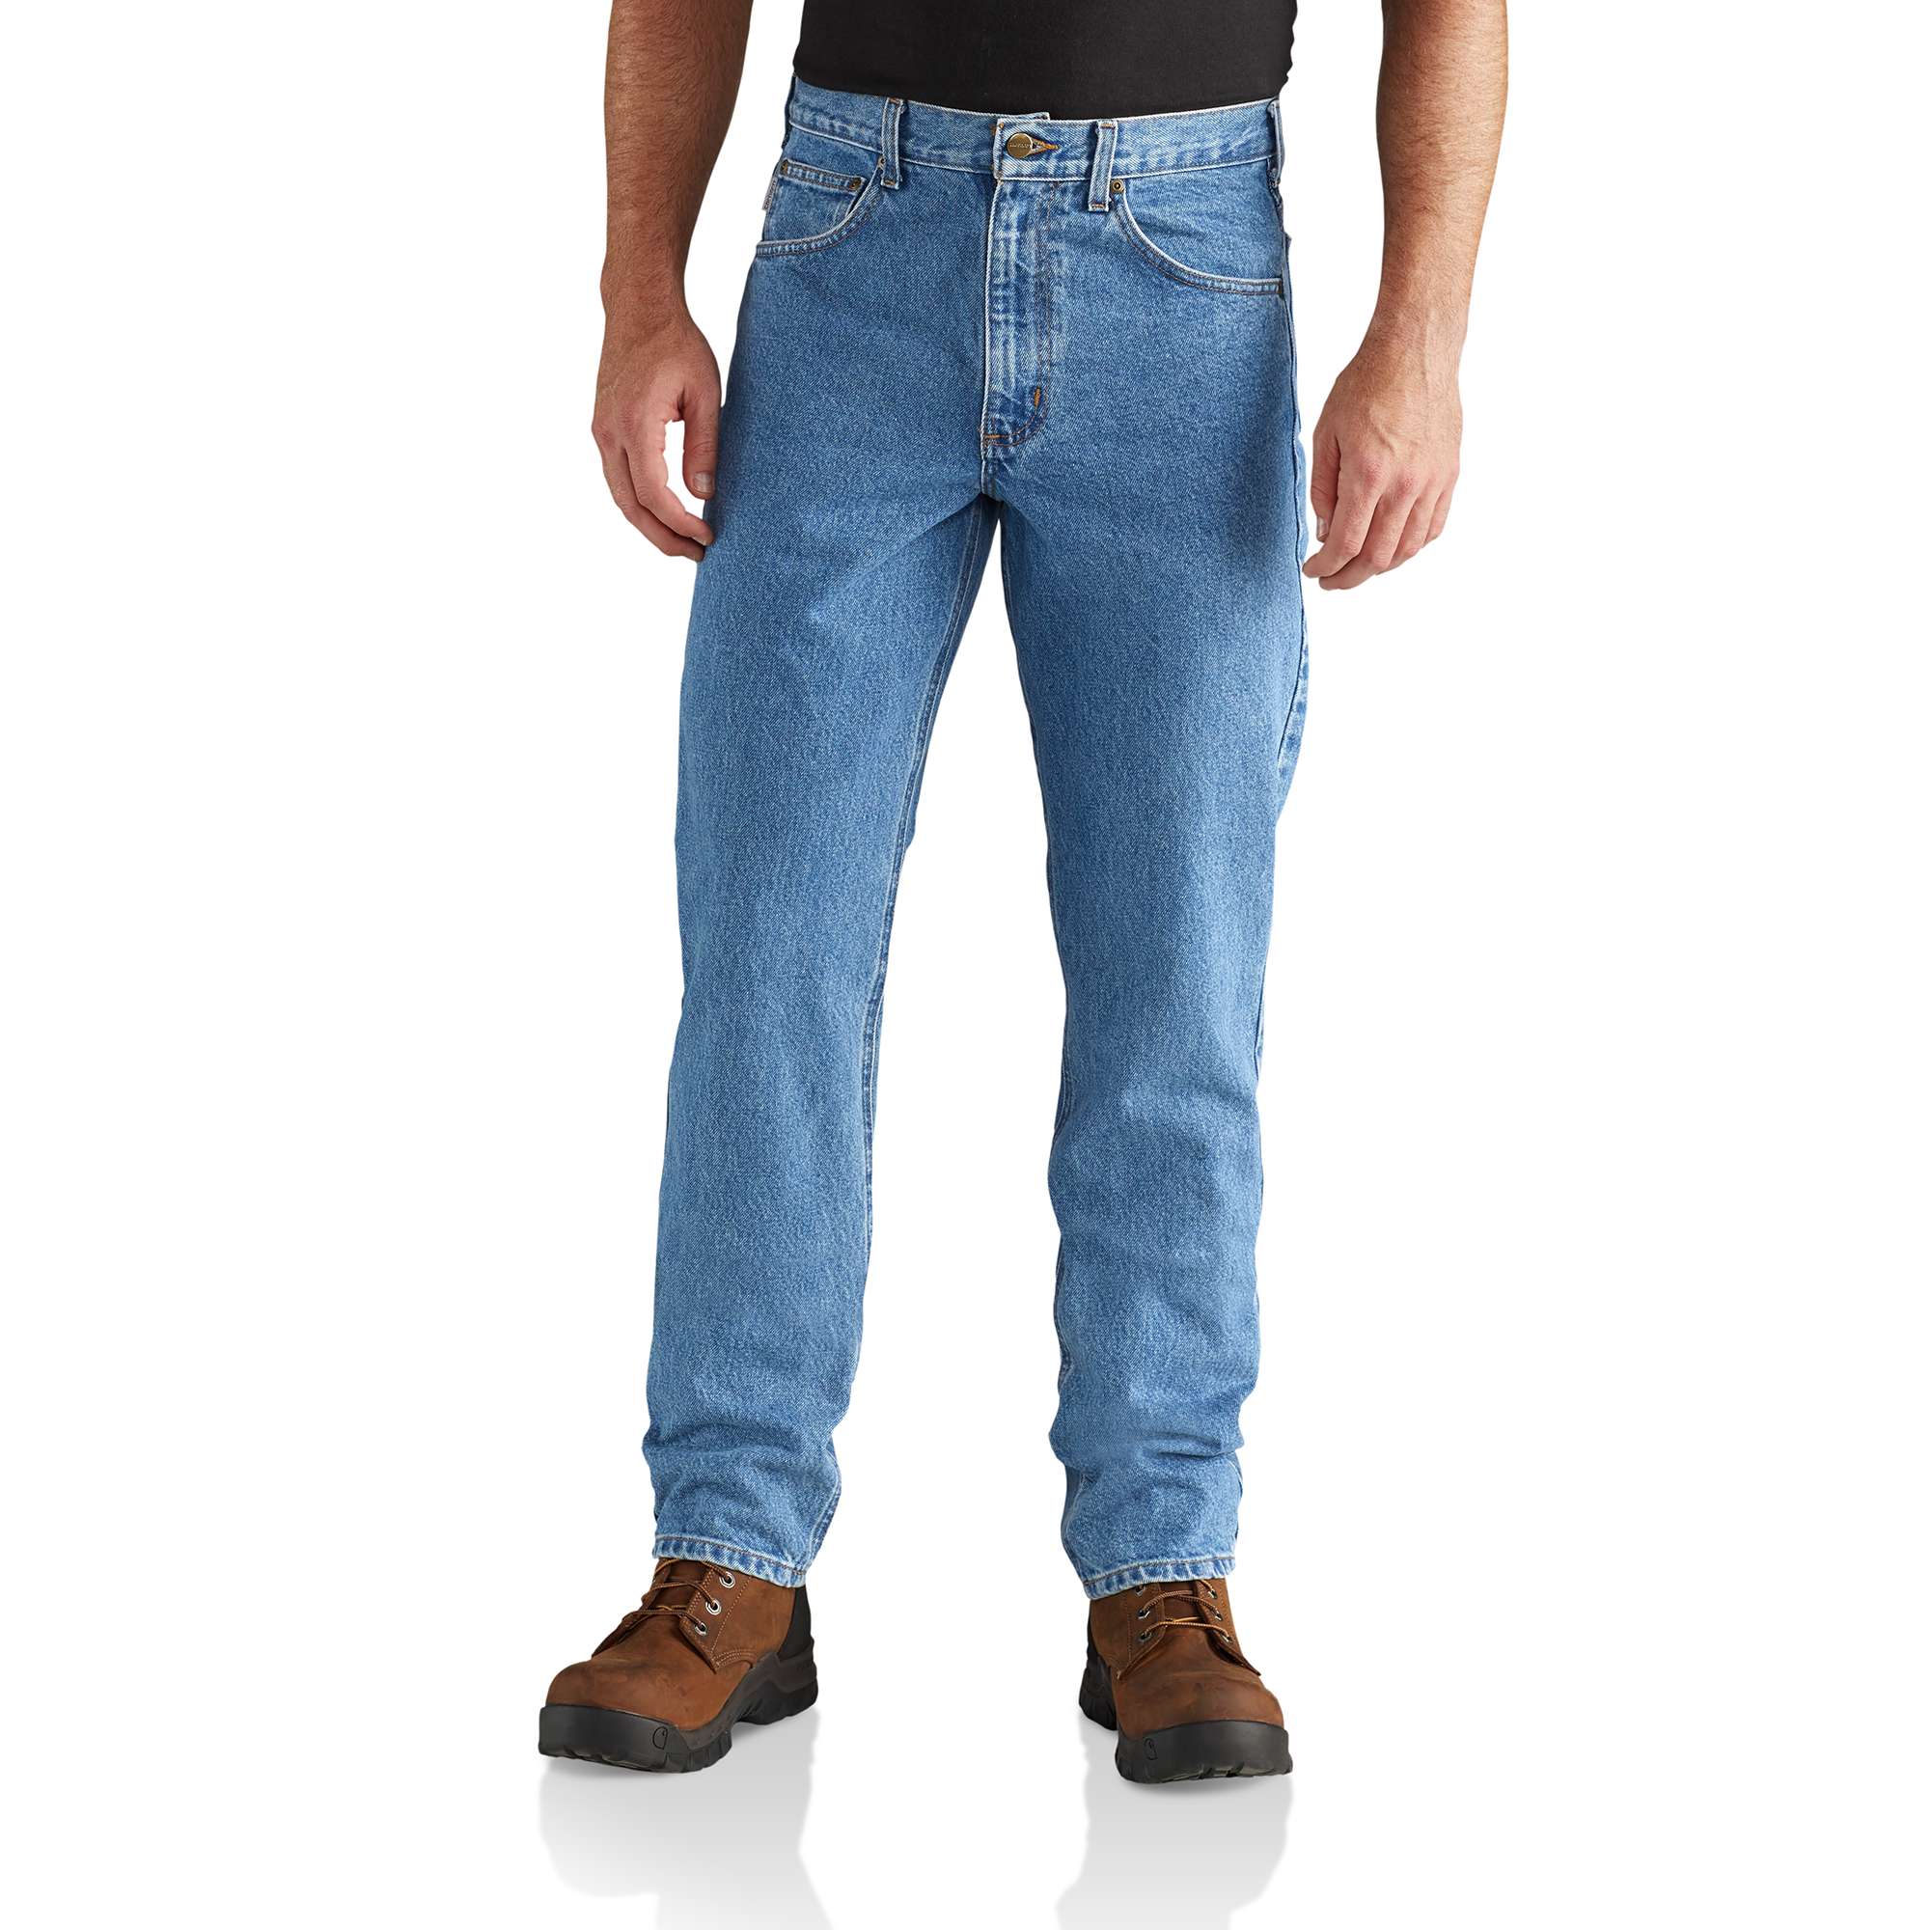 Men’s Traditional Fit Jean